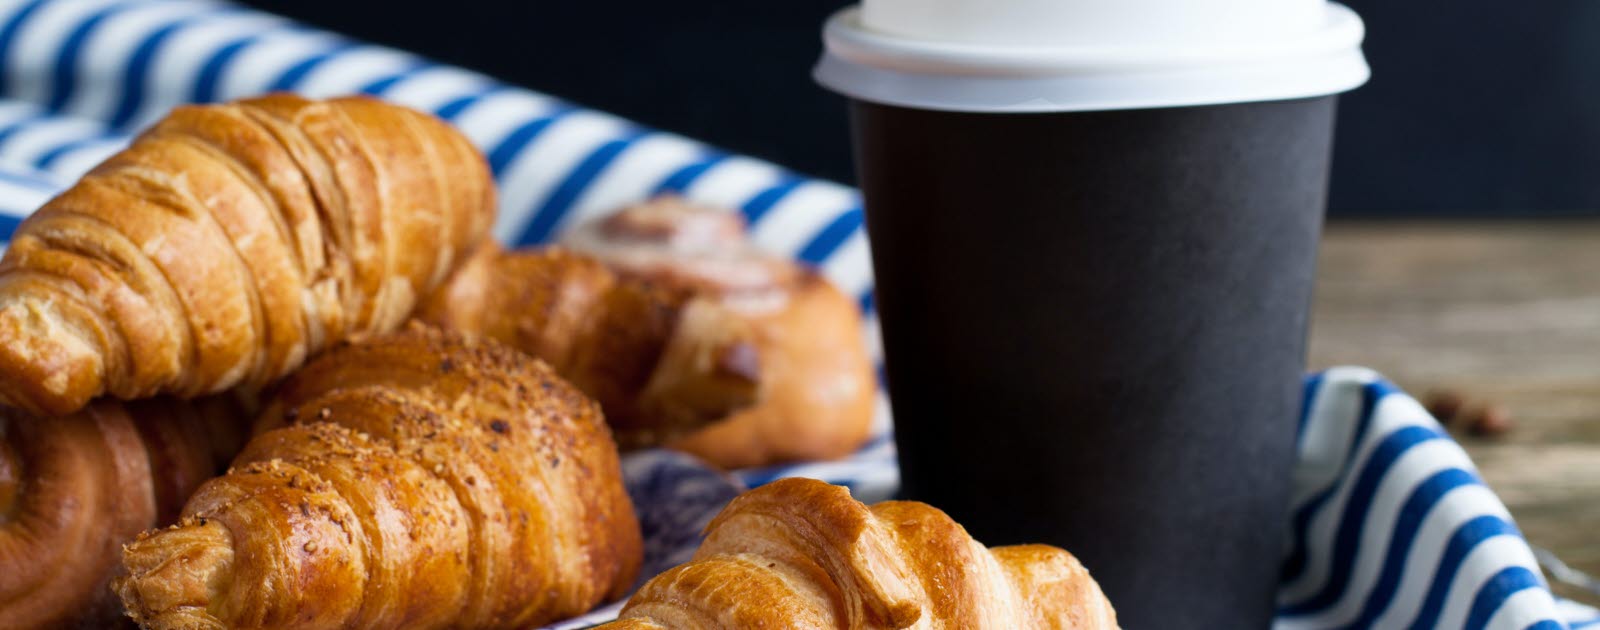 Plate of croissants and a to-go cup on wooden table.